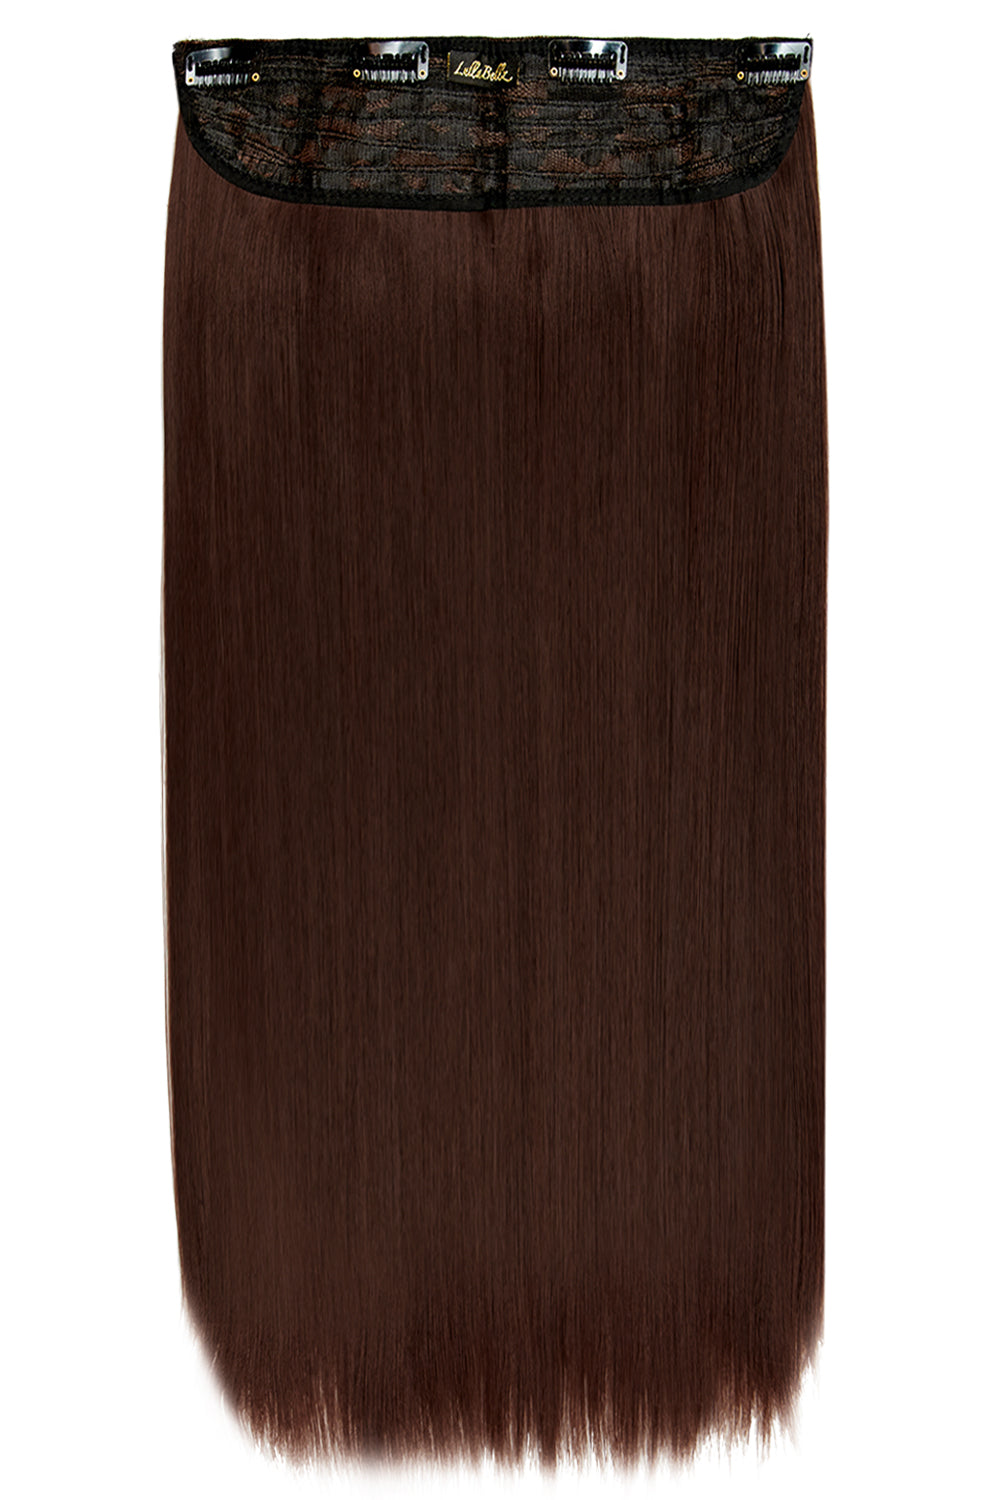 Thick 24" 1 Piece Straight Clip In Hair Extensions - Warm Brunette